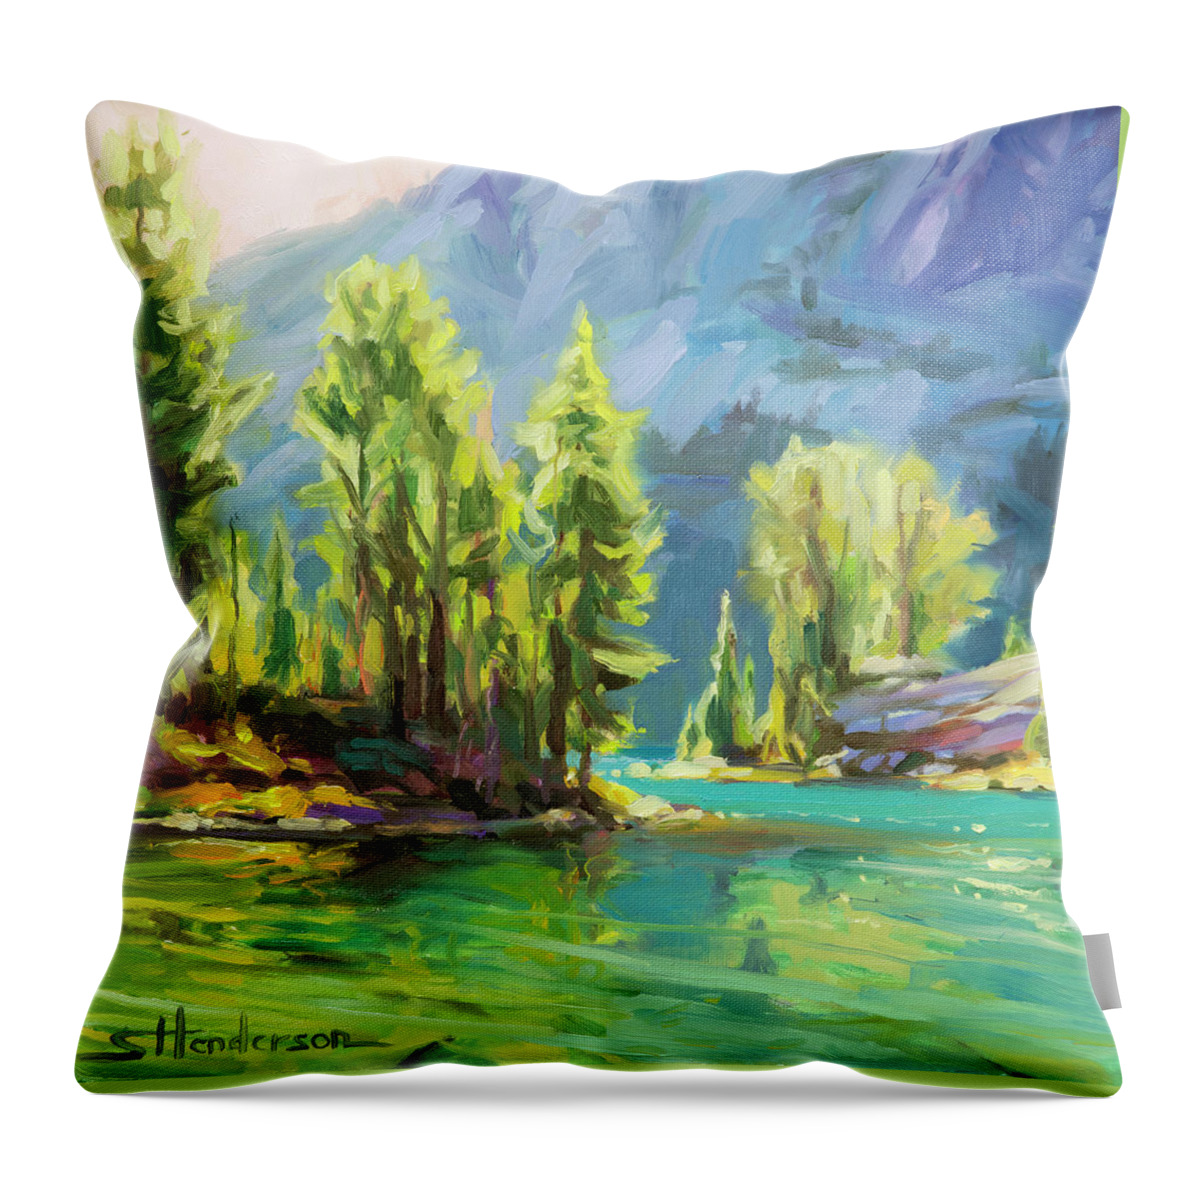 Lake Throw Pillow featuring the painting Shades of Turquoise by Steve Henderson